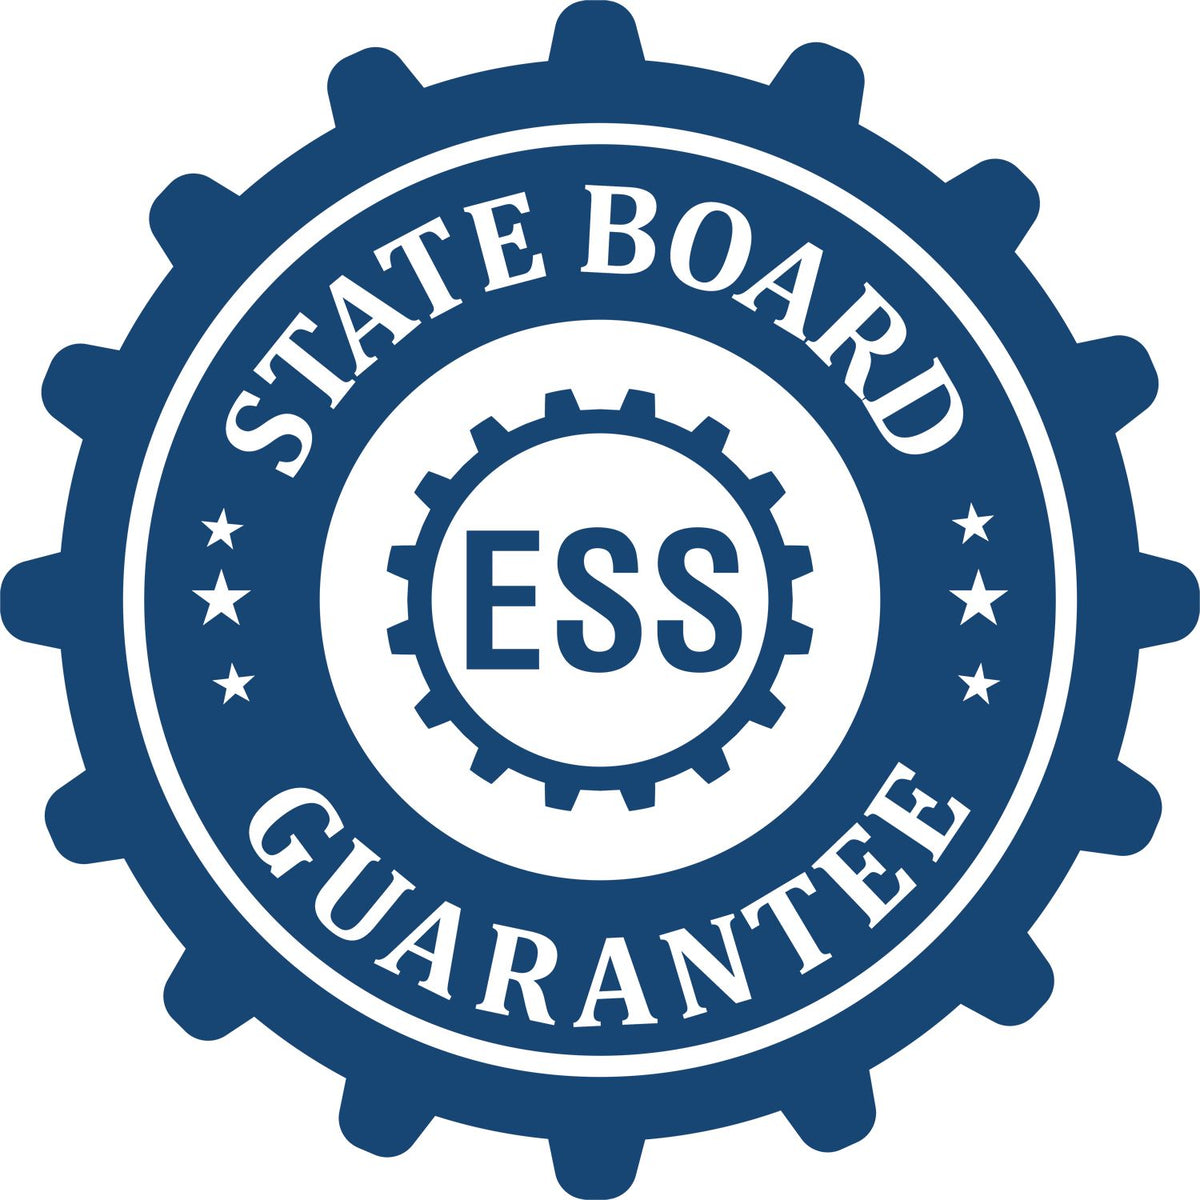 An emblem in a gear shape illustrating a state board guarantee for the State of Washington Long Reach Architectural Embossing Seal product.